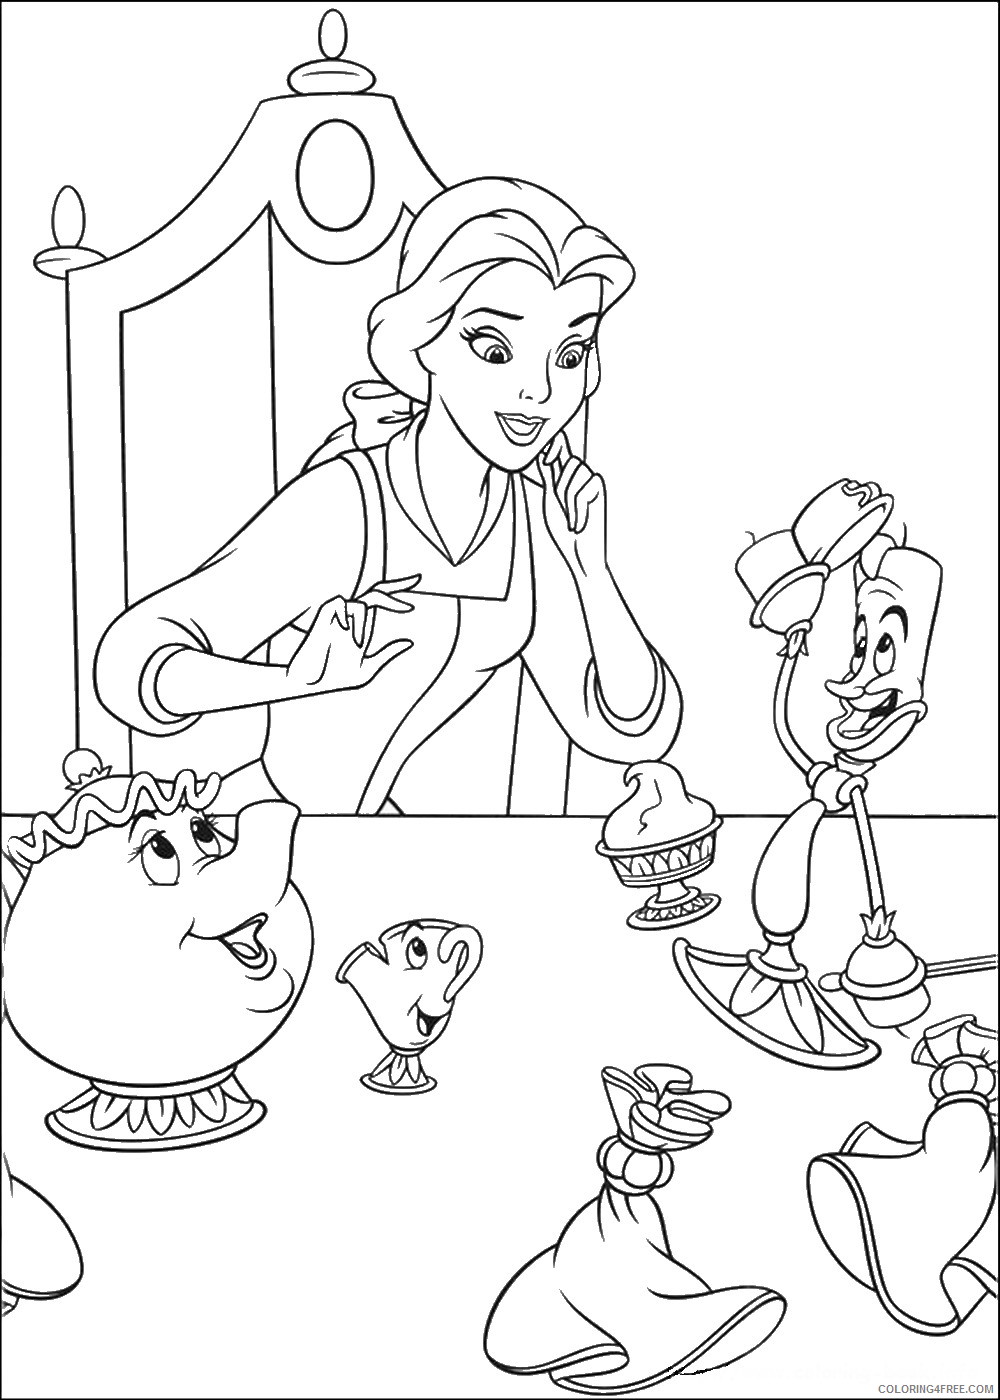 Beauty and the Beast Coloring Pages Cartoons the_beauty_beast_cl_10 Printable 2020 1184 Coloring4free